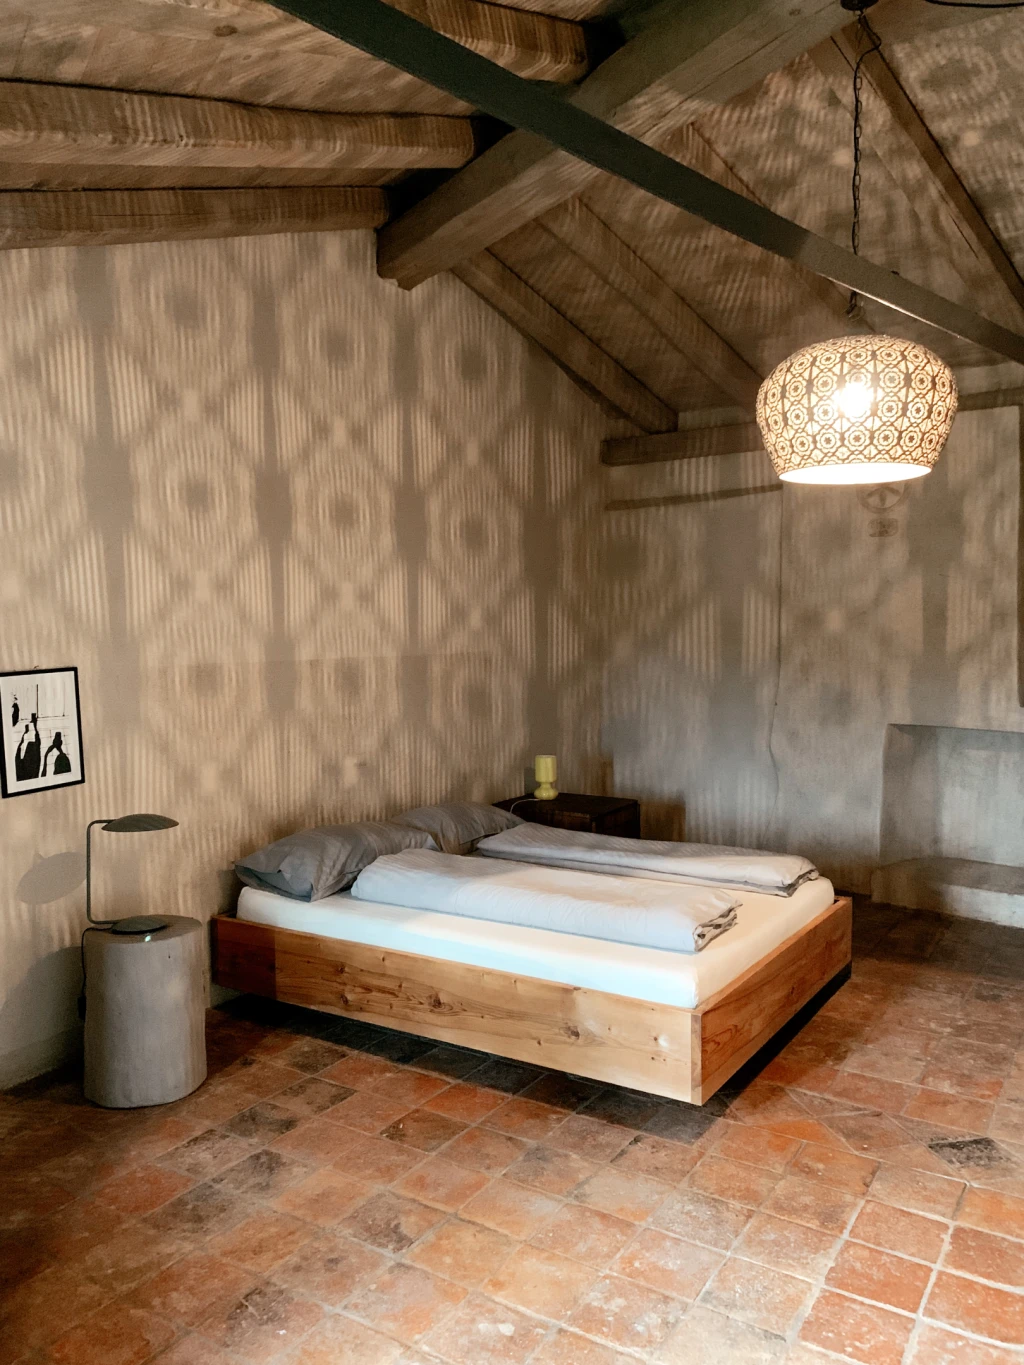 A very comfortable bed in this beautiful renovated stone house in Piemonte